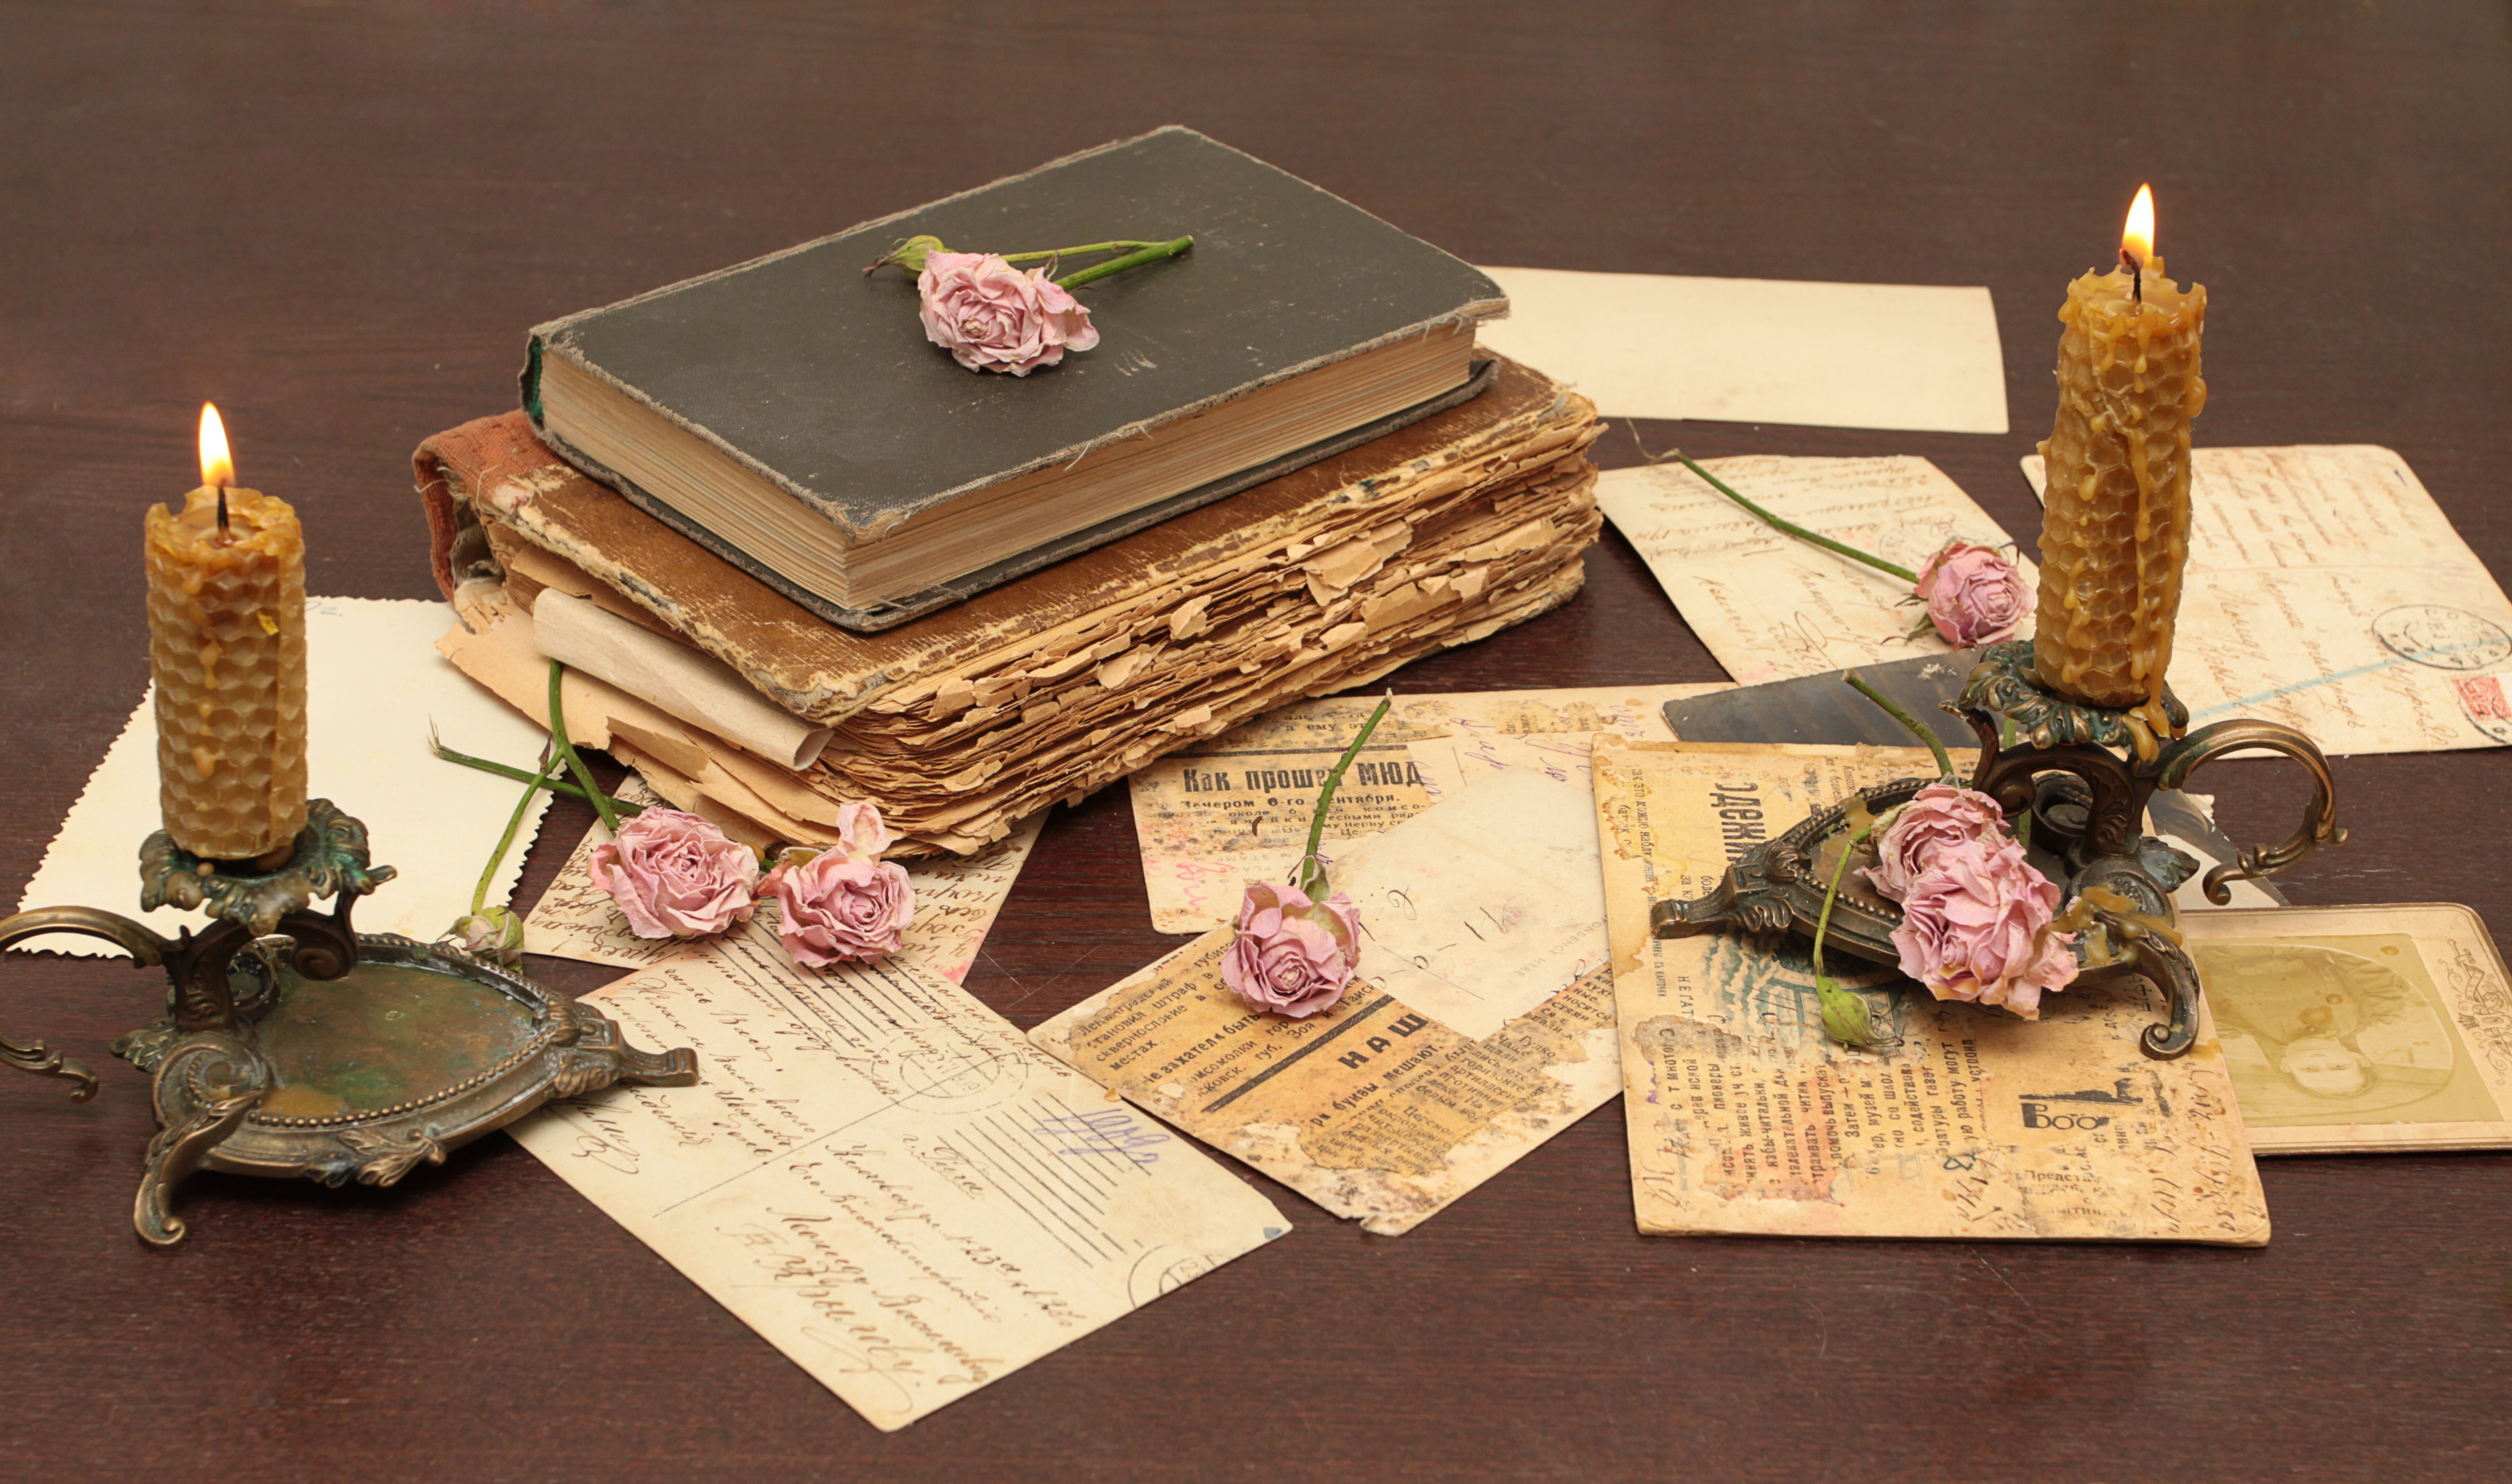 miscellaneous, old, vintage, miscellanea, books, flowers, roses, candles, postcards, table, paper, letters, candlesticks Aesthetic wallpaper